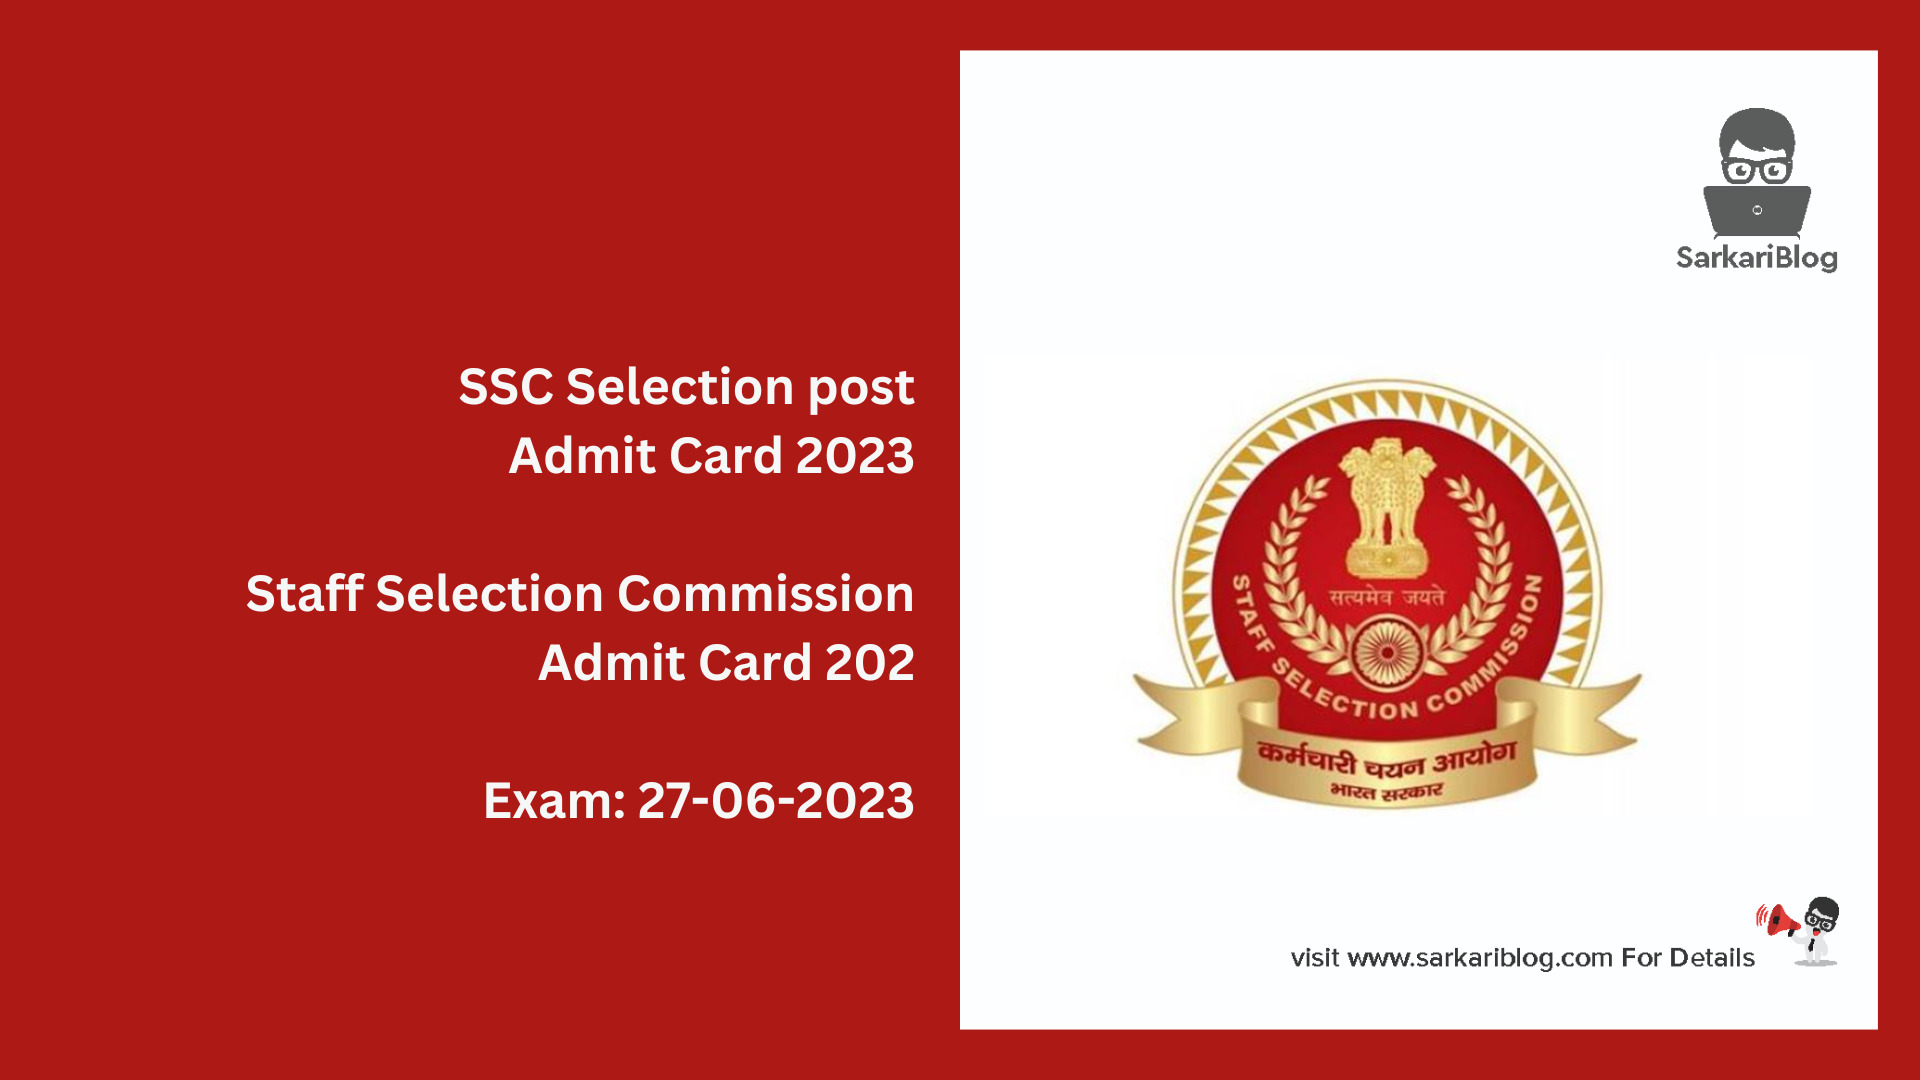 SSC Selection post Admit Card 2023